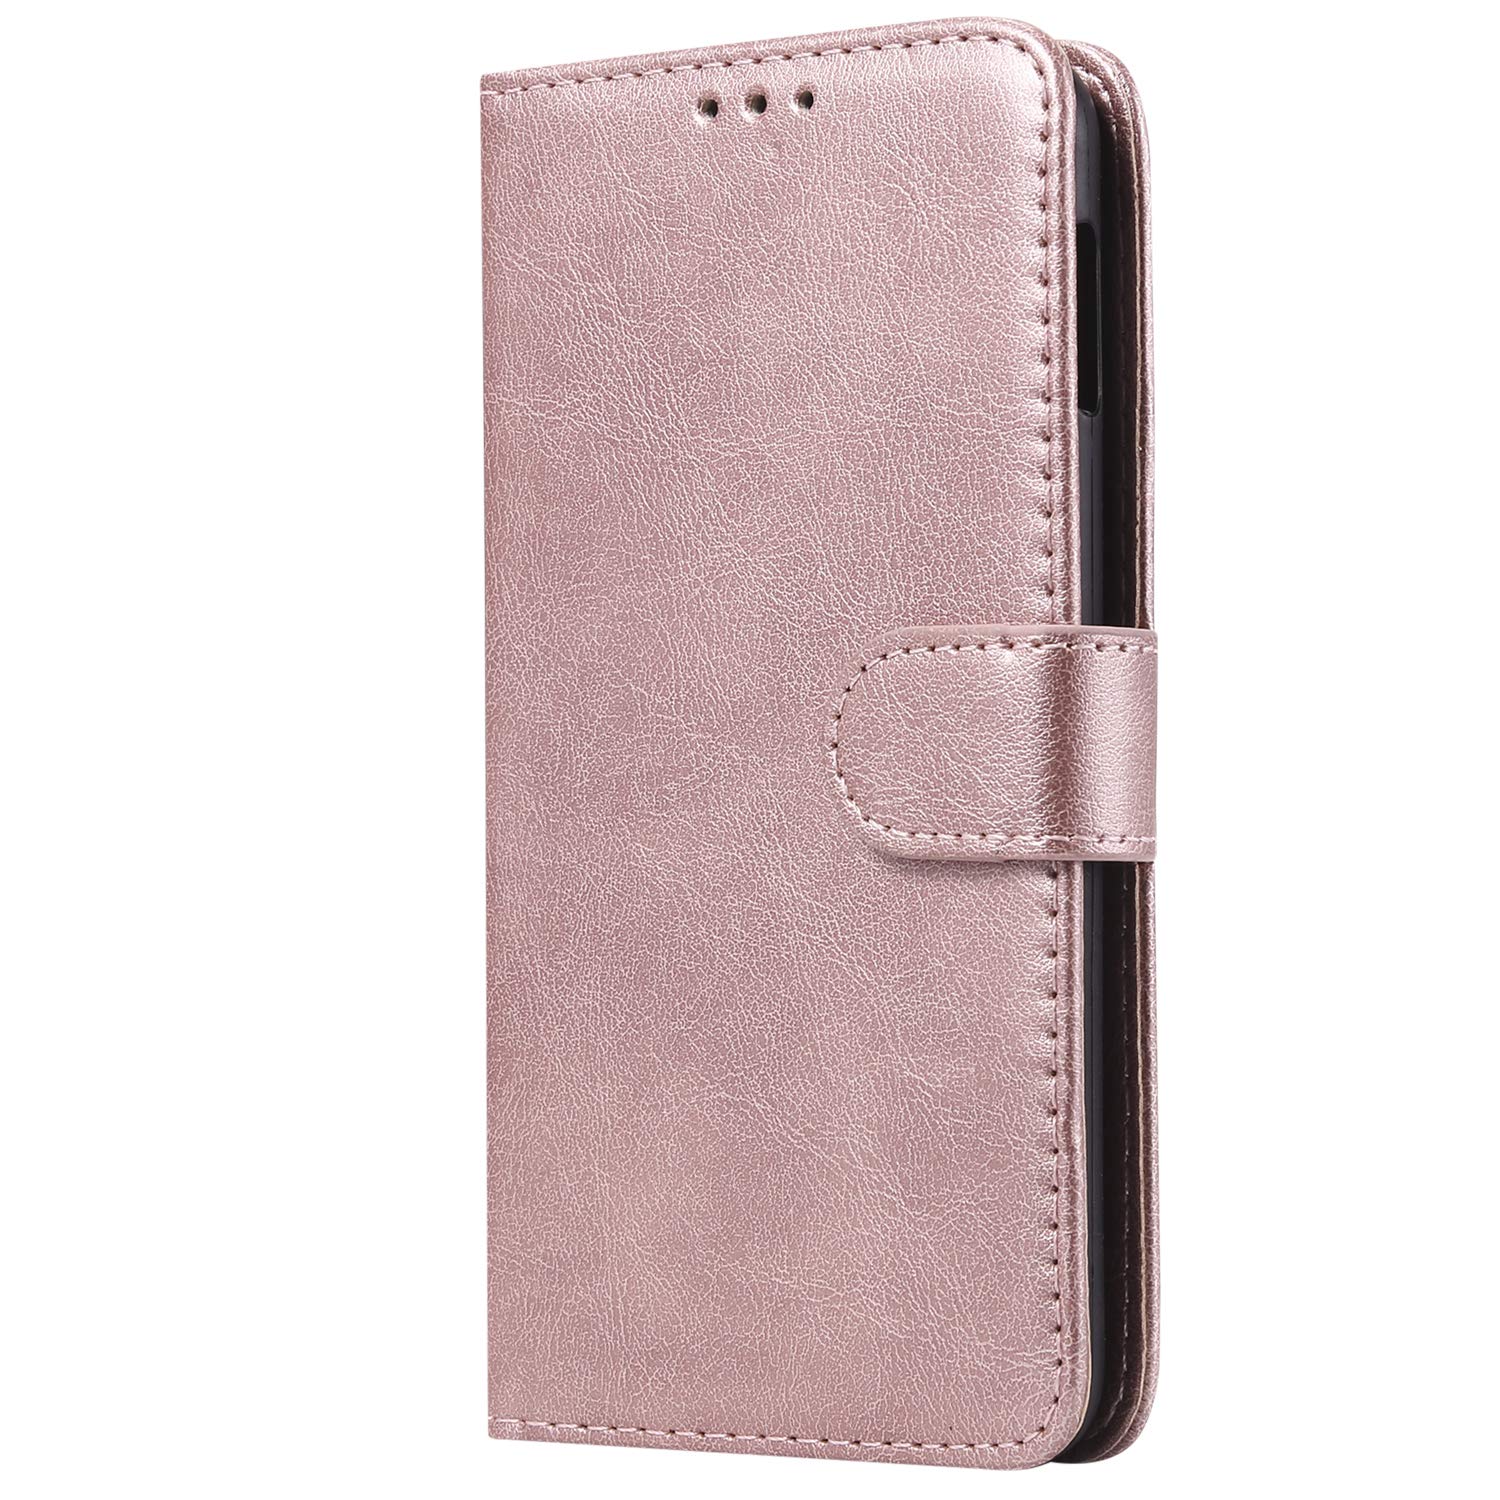 Rose wallet folio case protector for Samsung Galaxy S10 cell phones